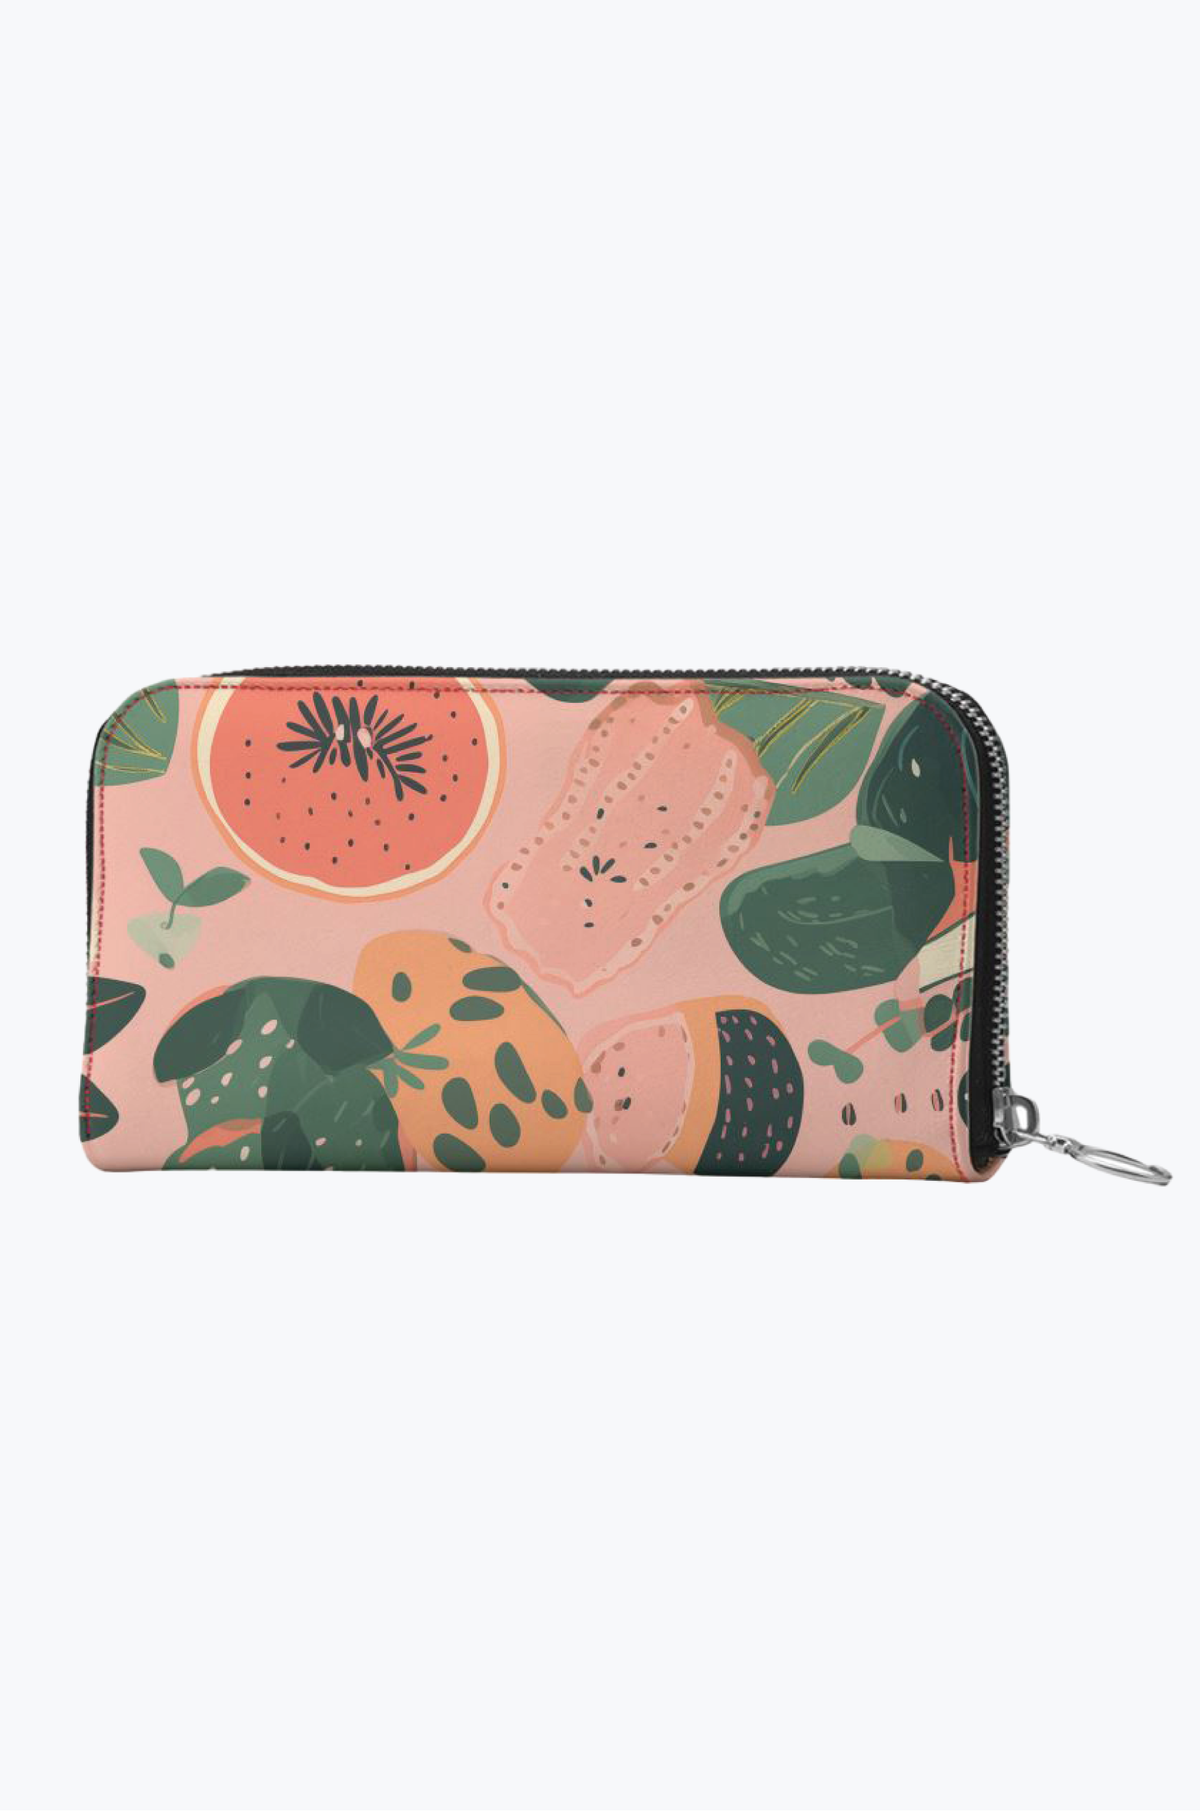 Pinkberry Melon 100% Leather Wristlet | Hypoallergenic - Allergy Friendly - Naturally Free